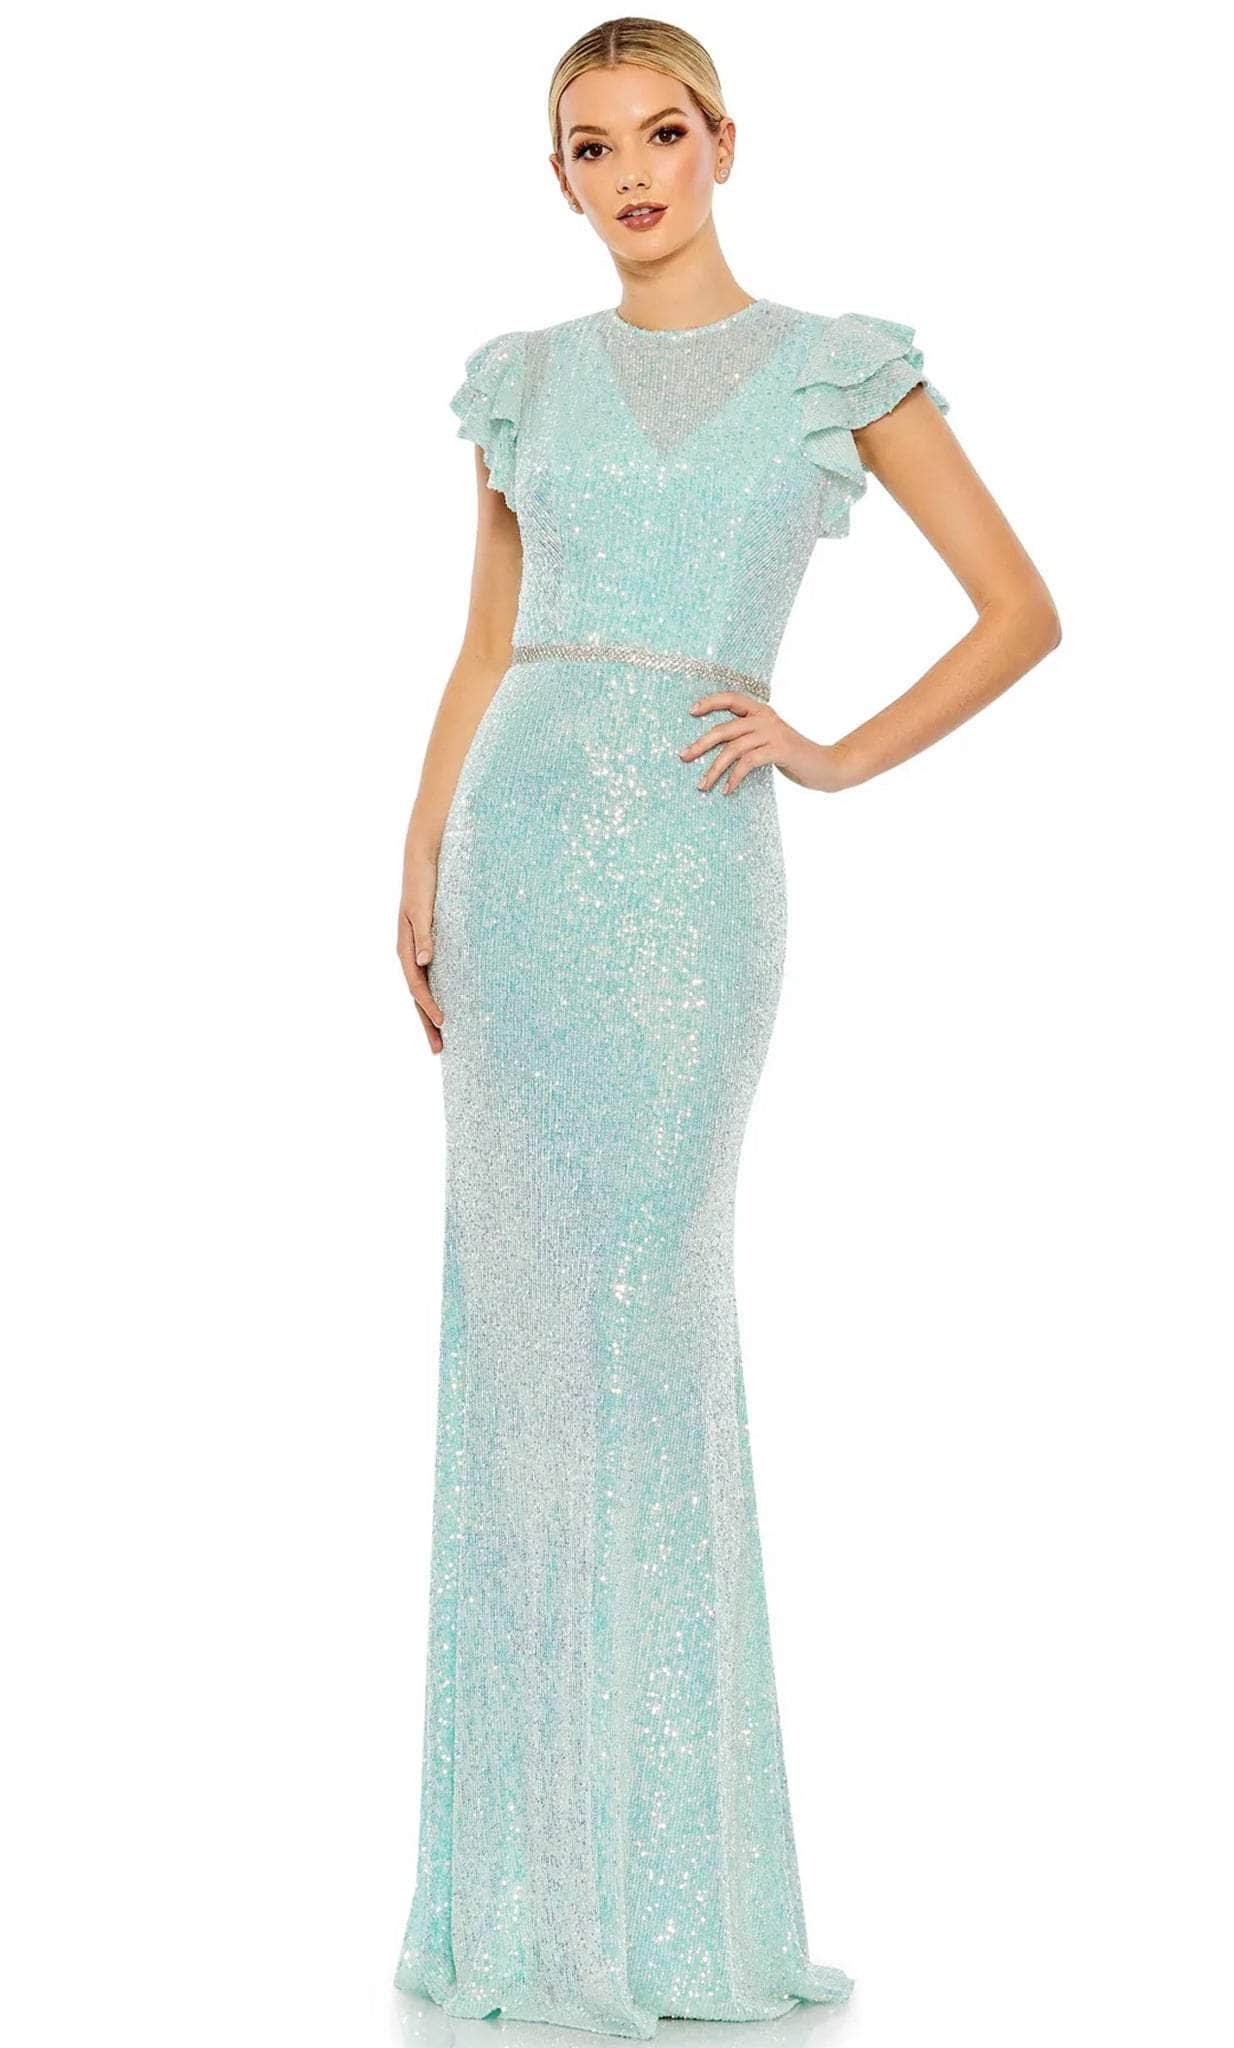 Ieena Duggal 26942 - Illusion High Neck Sequined Gown
